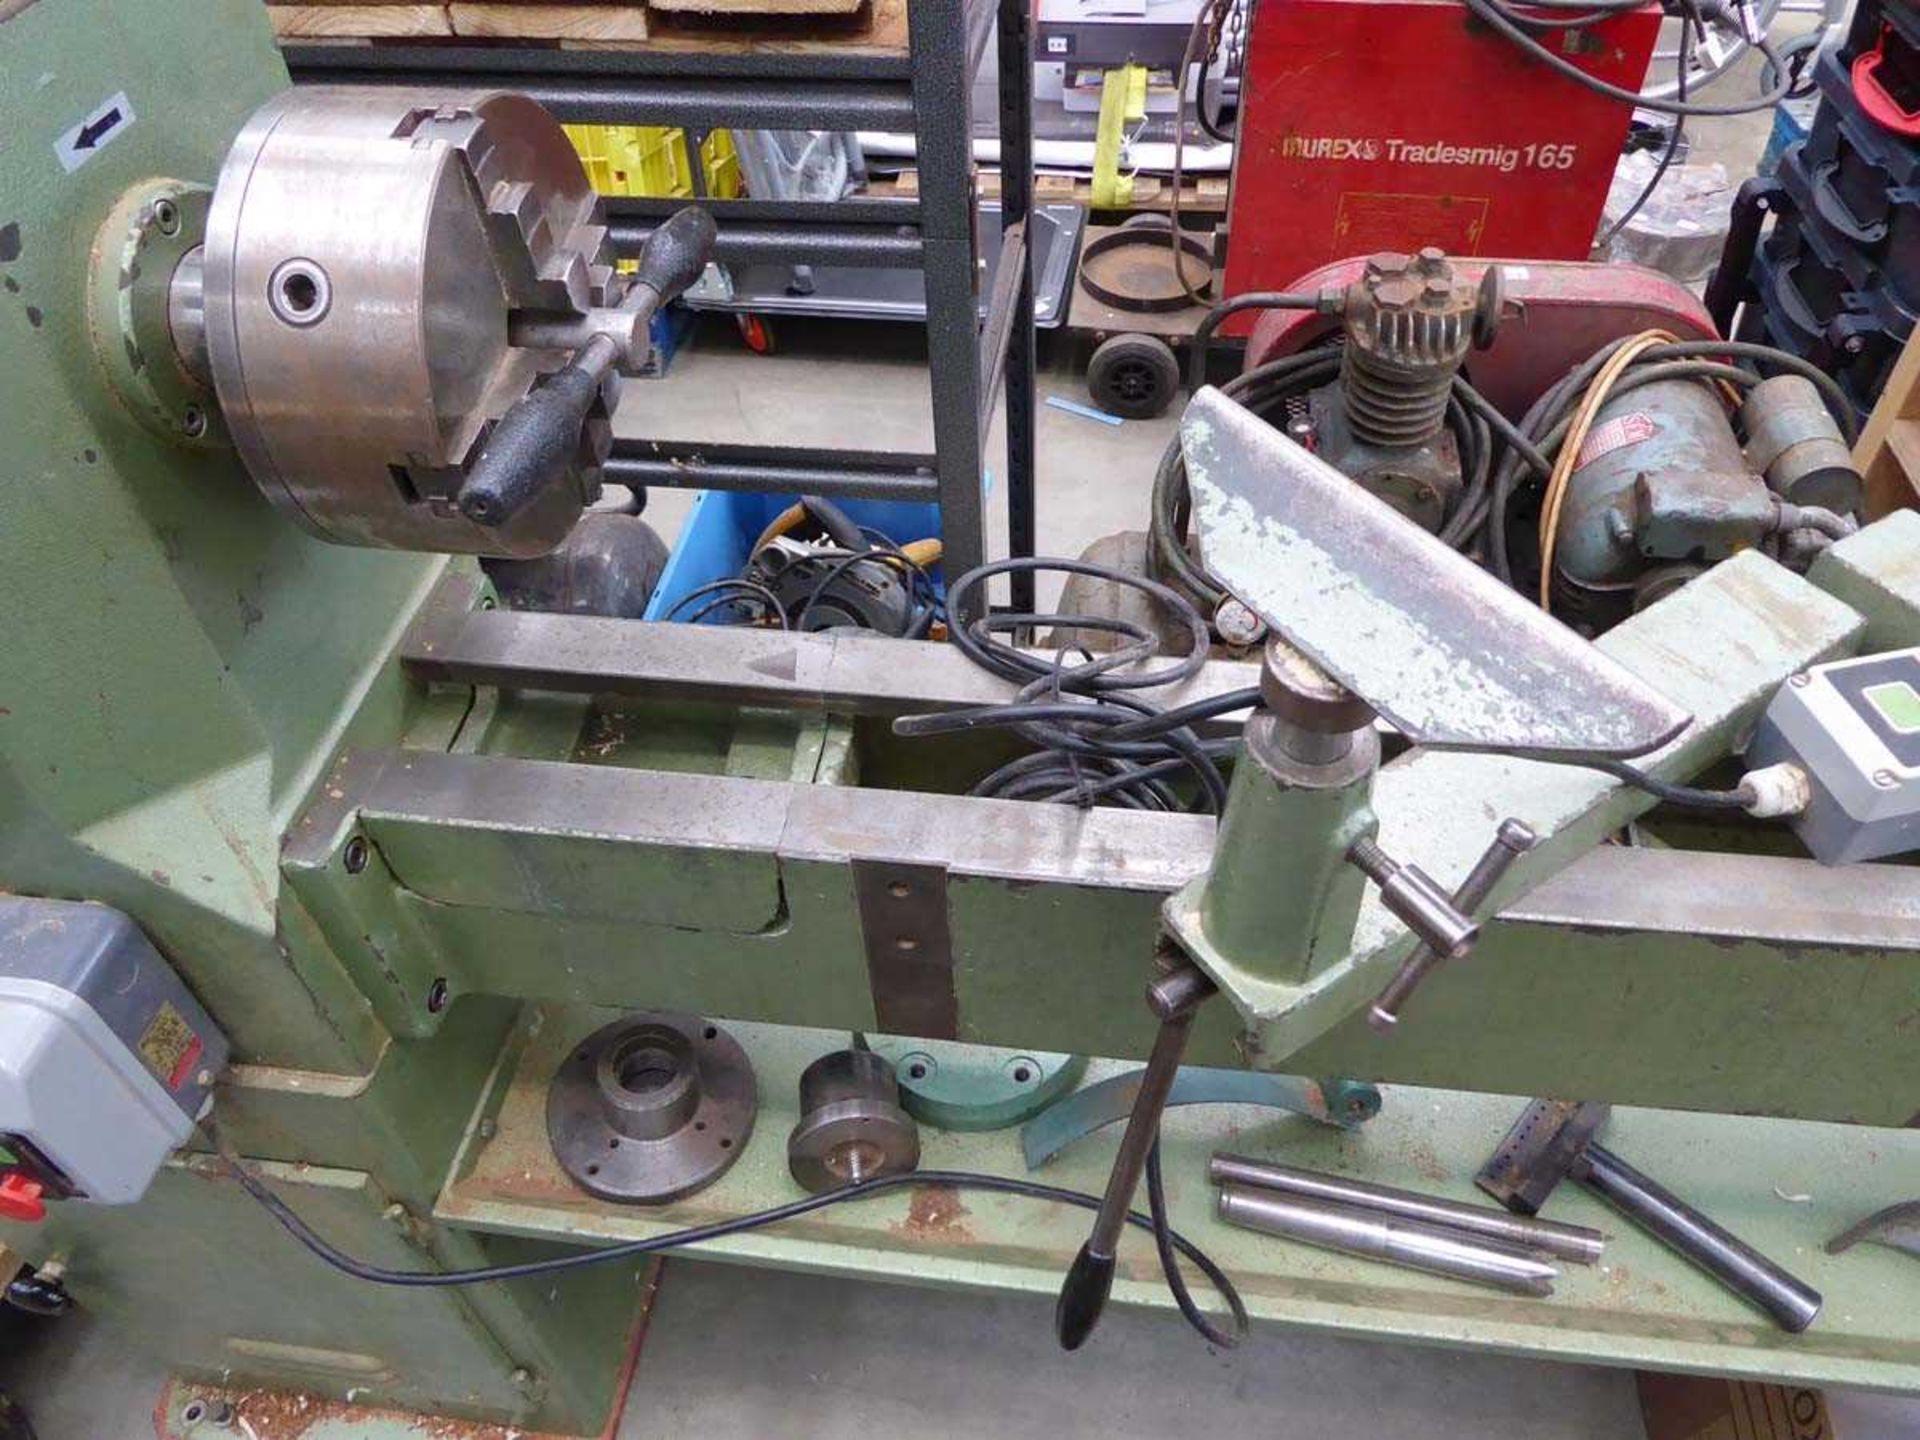 Hapco Albus Type AHDR 130-C woodturning copy lathe with 8ft - 16ft bed and barley twist tooling plus - Image 3 of 6